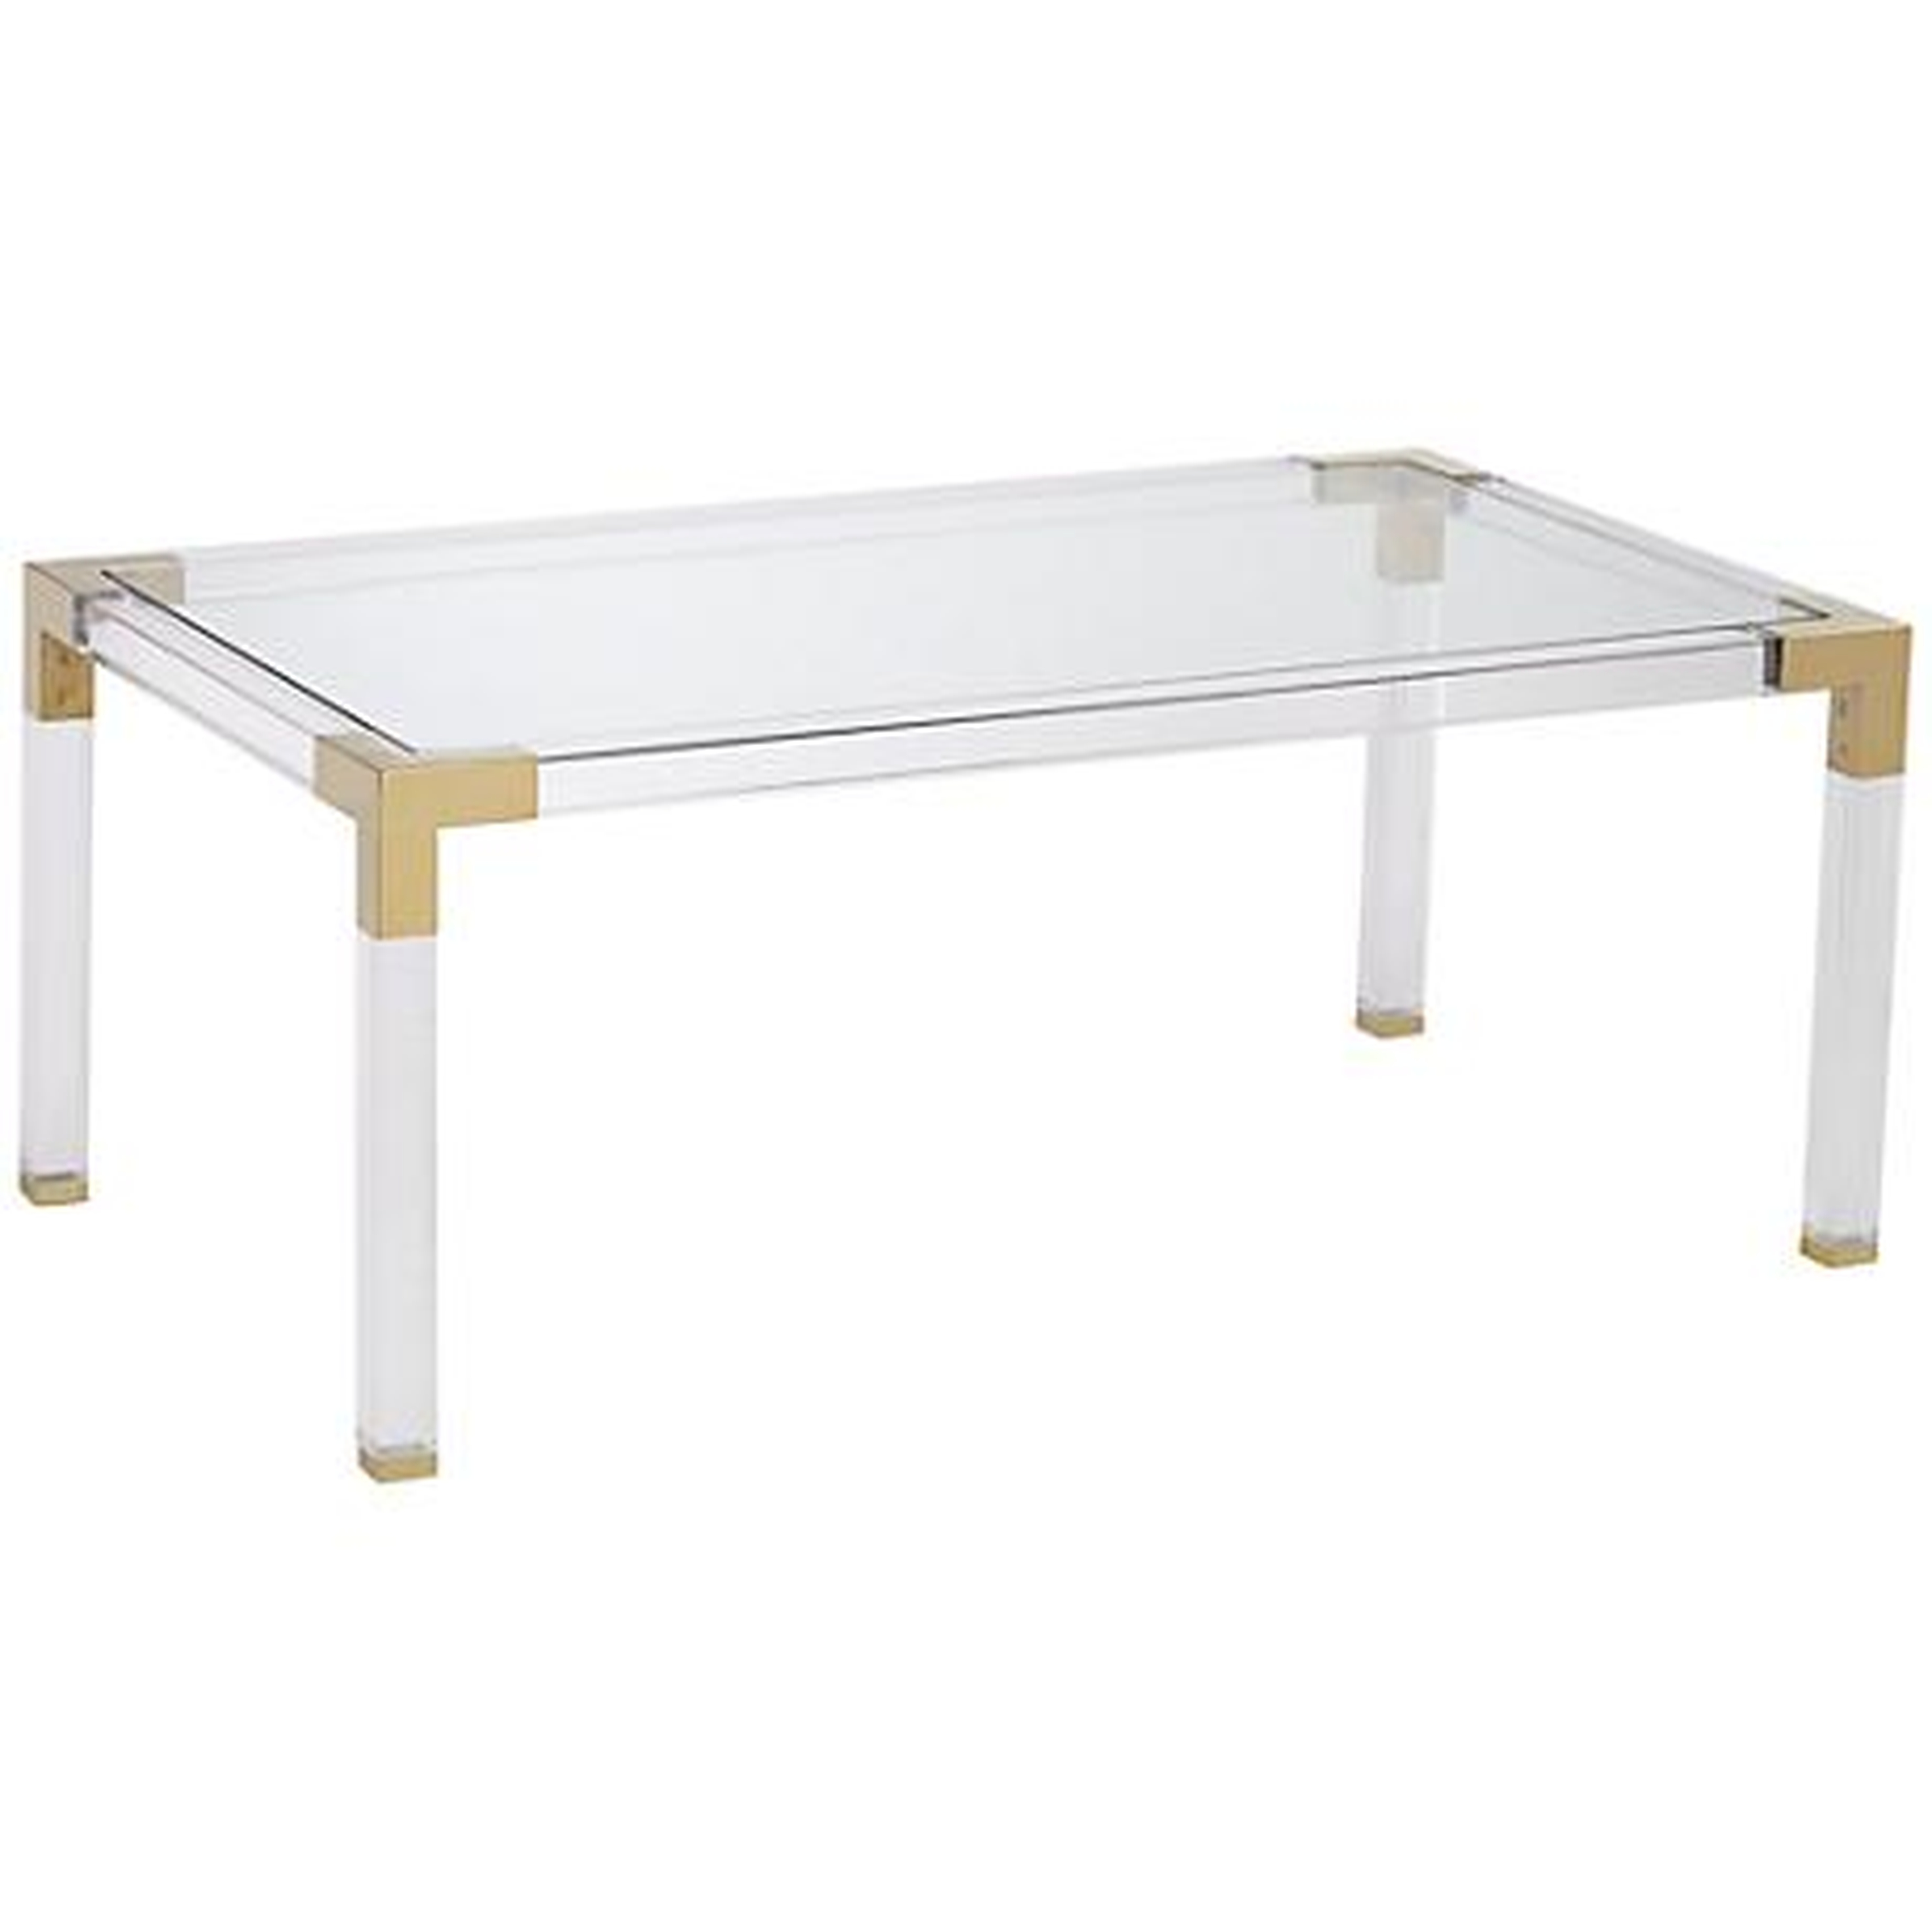 Erica Rectangle Acrylic Coffee Table with Gold Corners clear - Lamps Plus